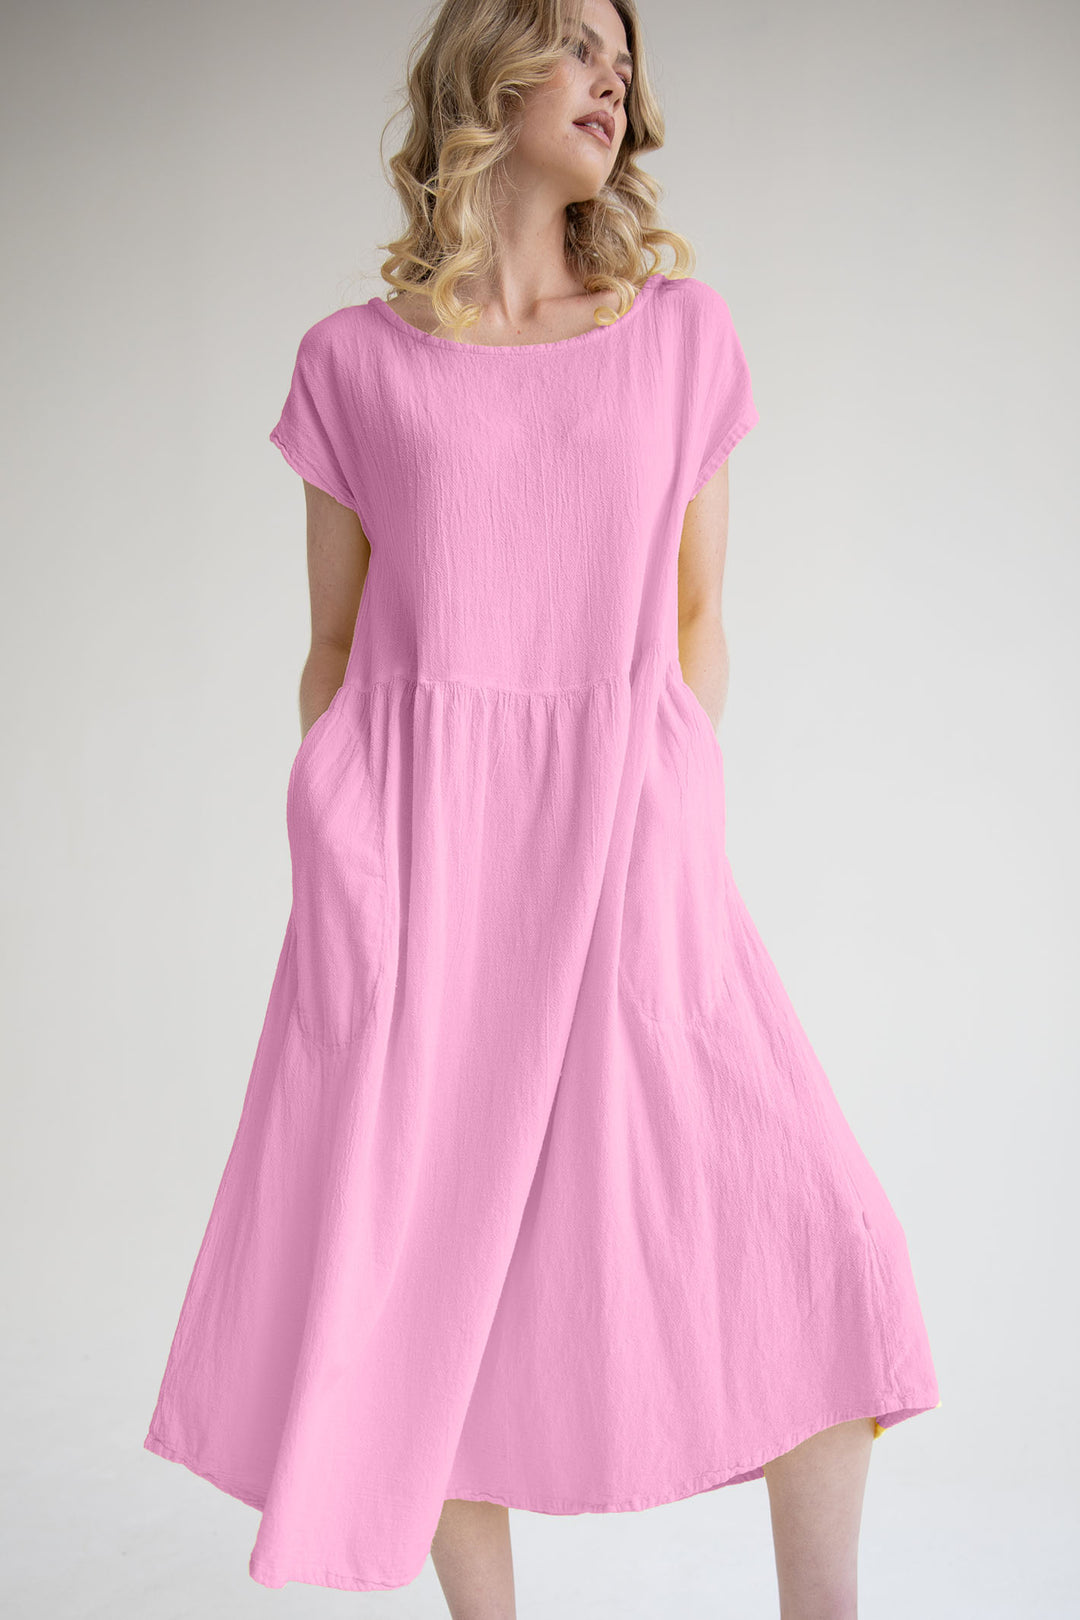 Onelife D625 Alba Fondant Pink Boat Neck Cap Sleeve Dress - Experience Boutique